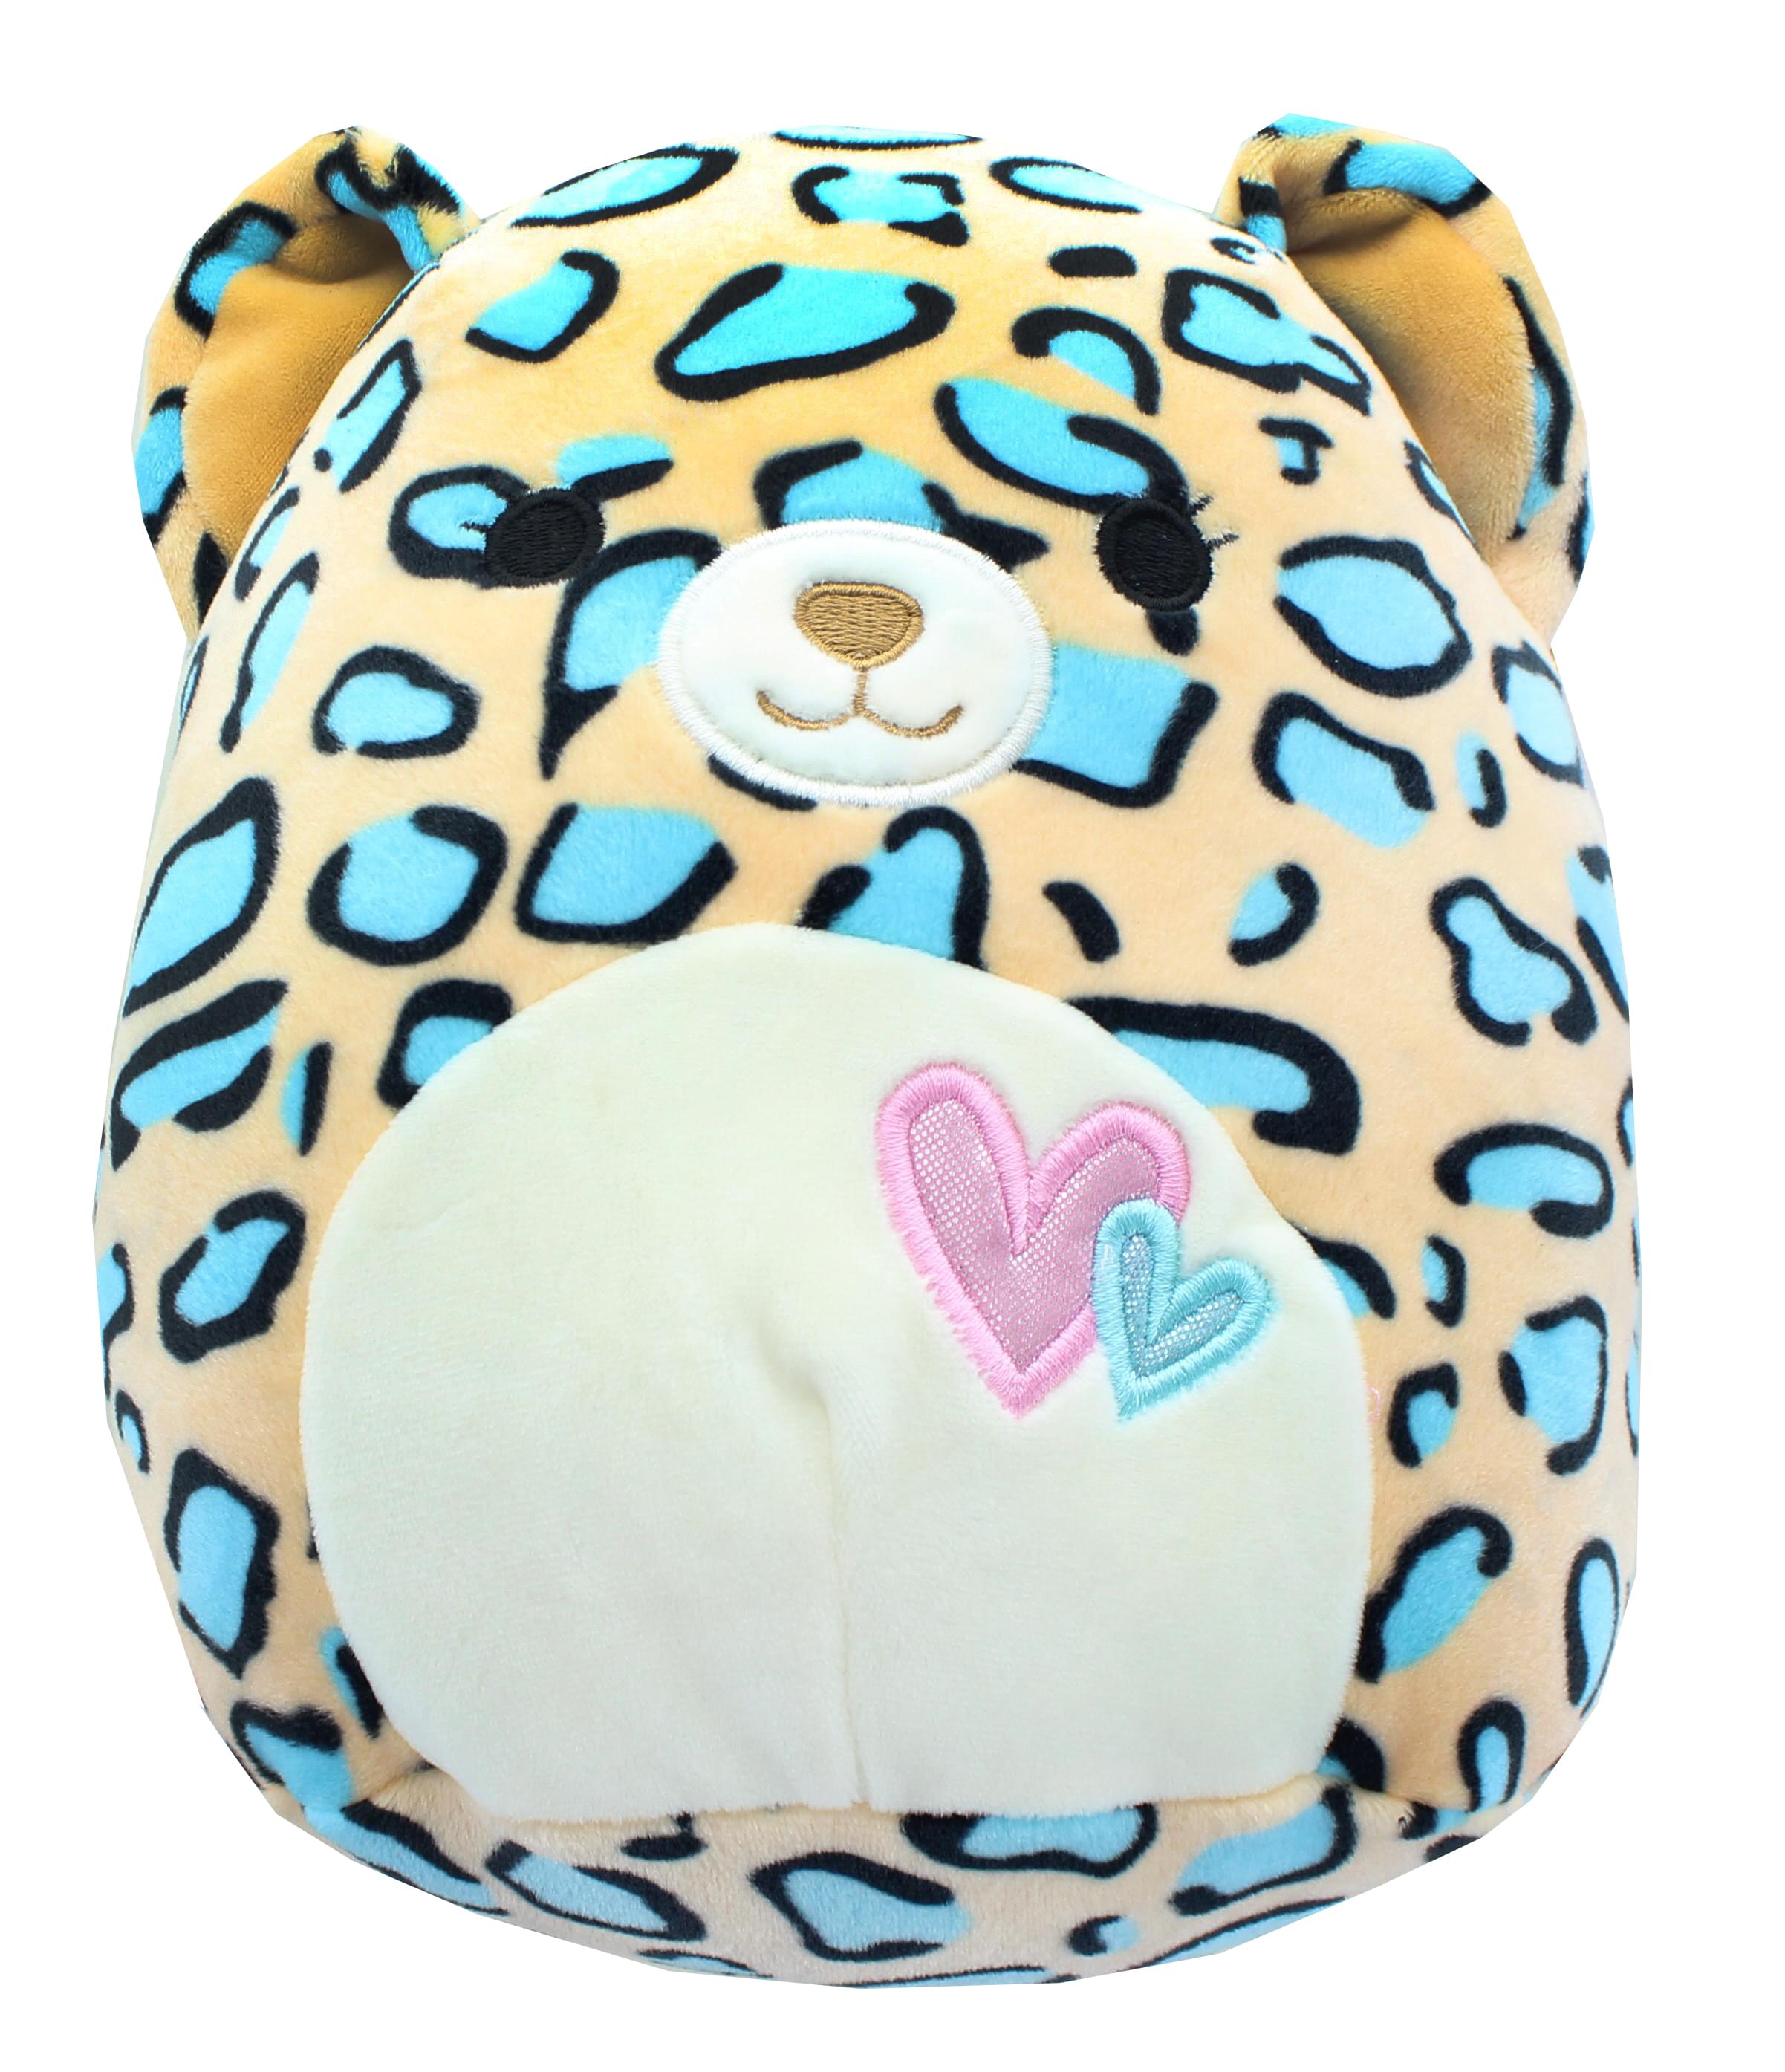 Squishmallow  Kylie the Cheetah 11" Valentine Plush Pillow Toy by Kellytoy  NEW 